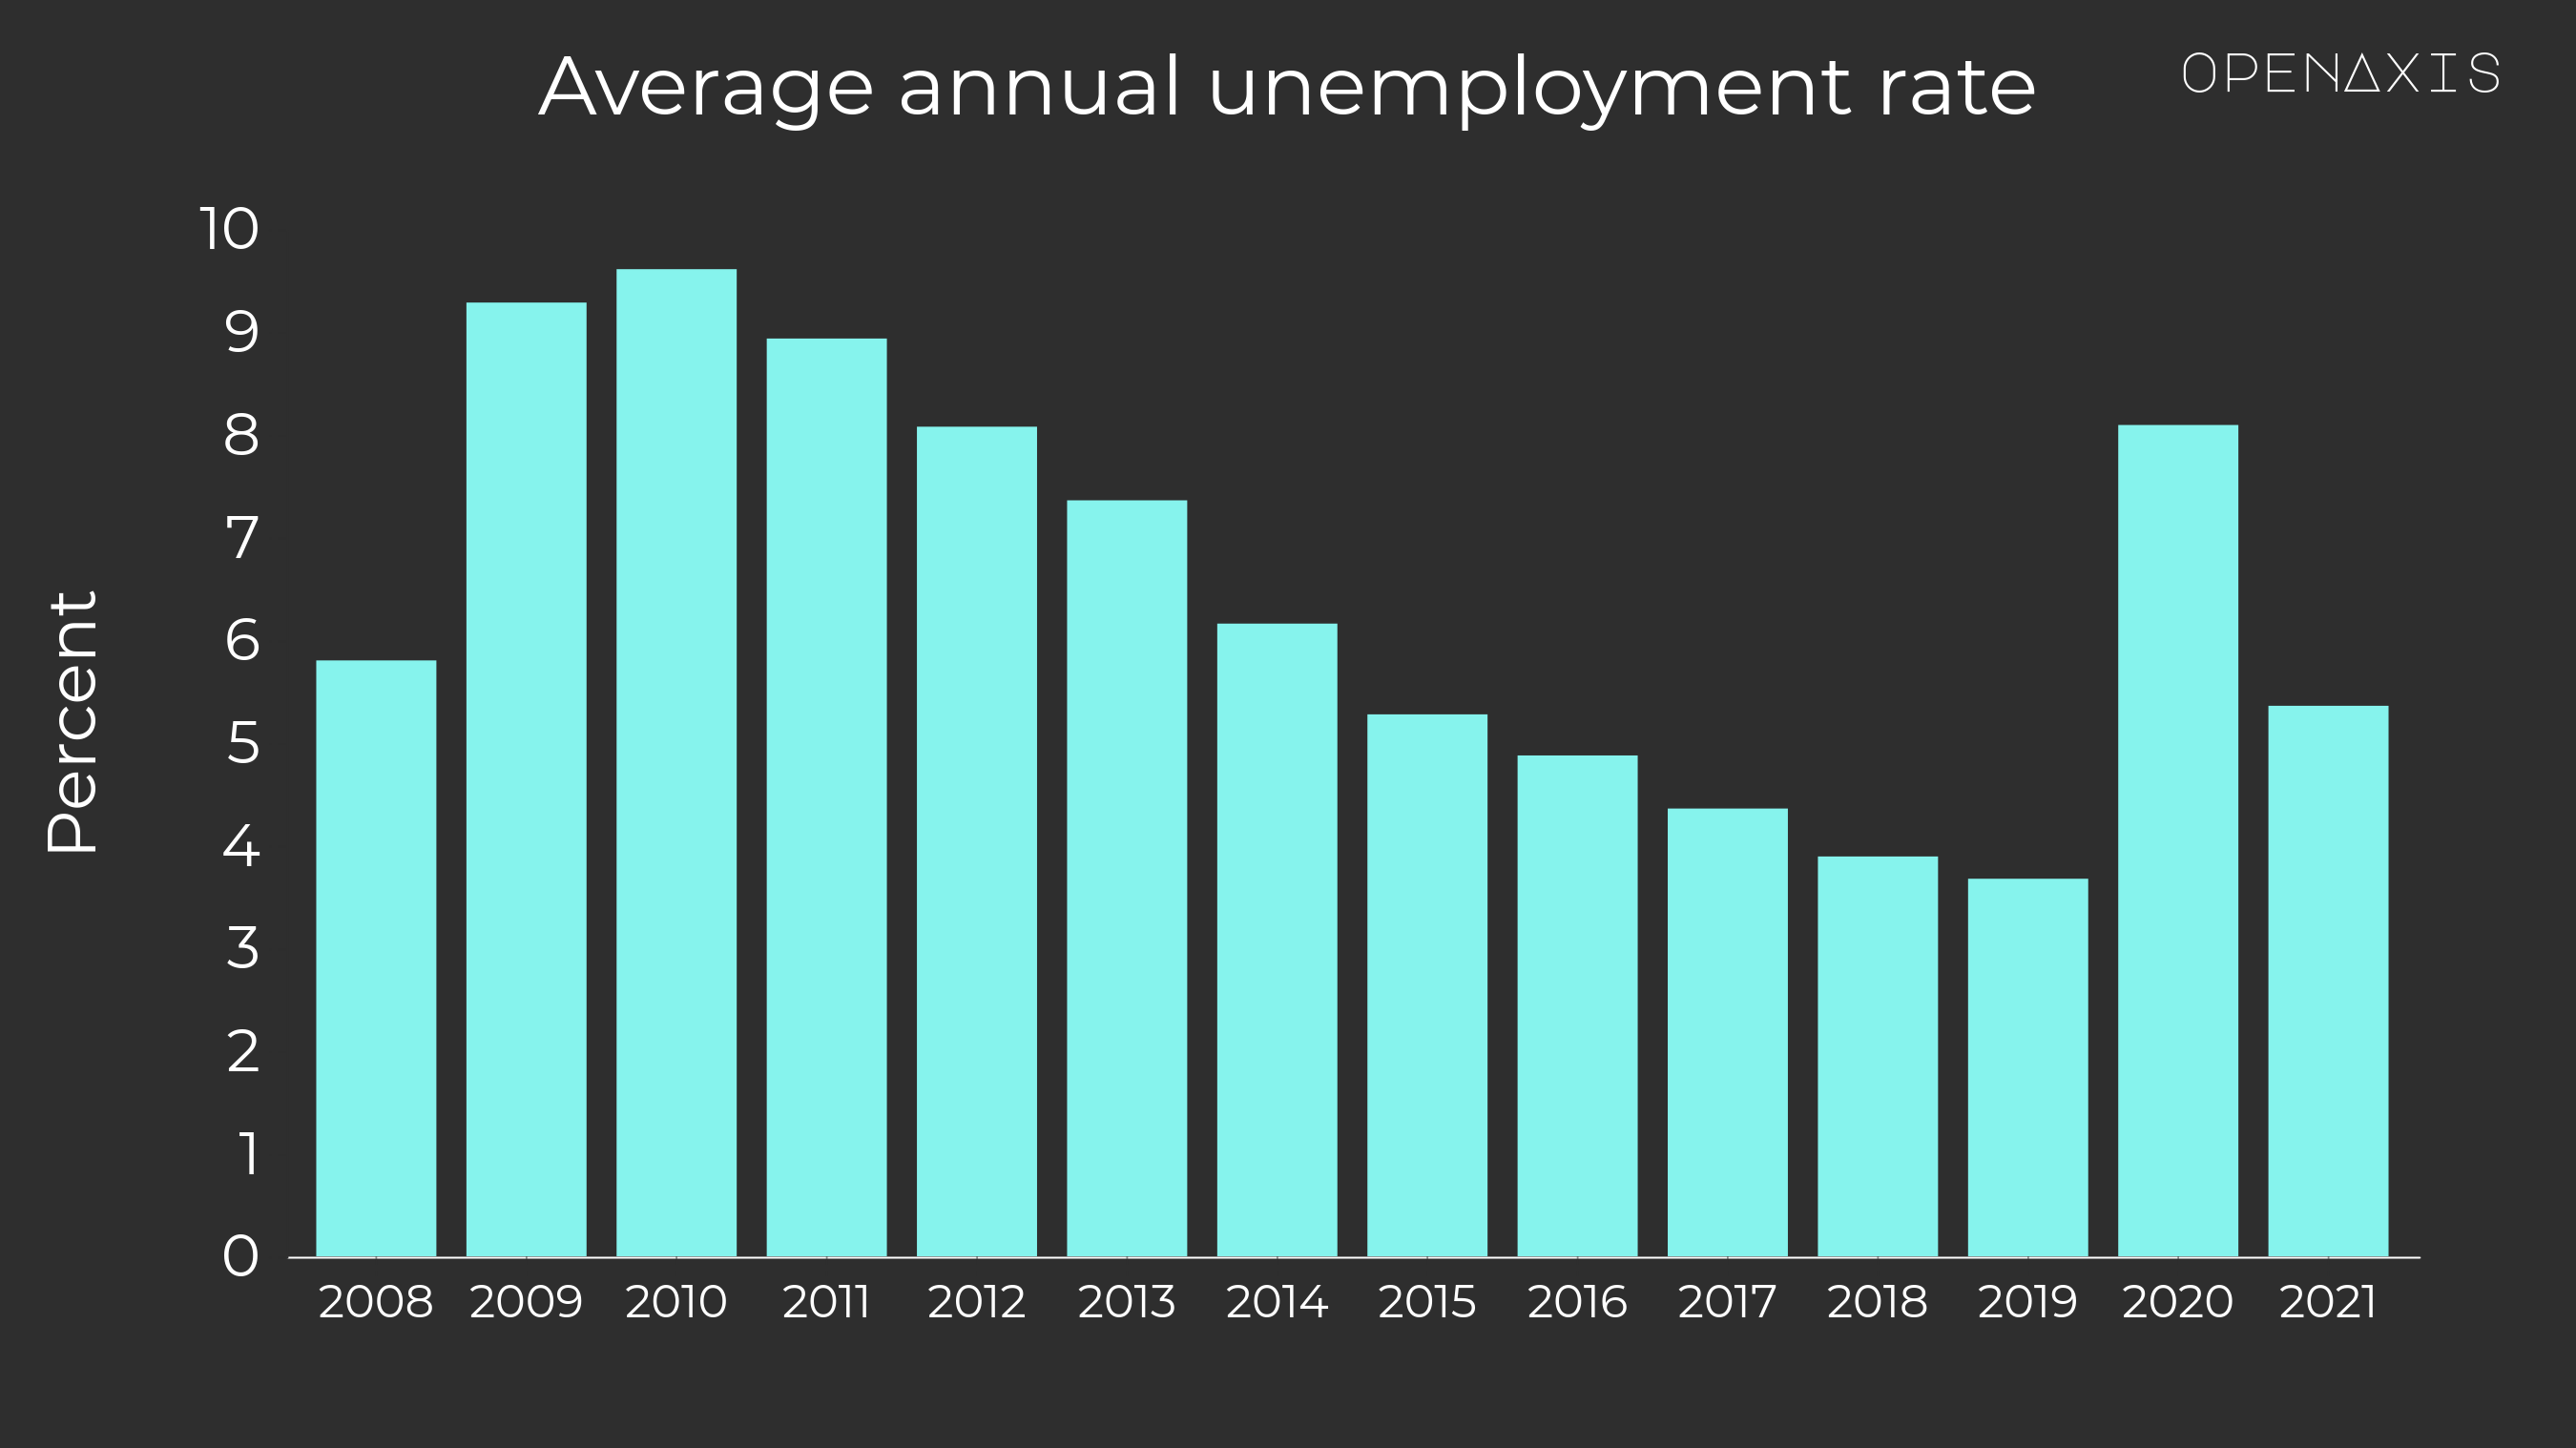 "Average annual unemployment rate"